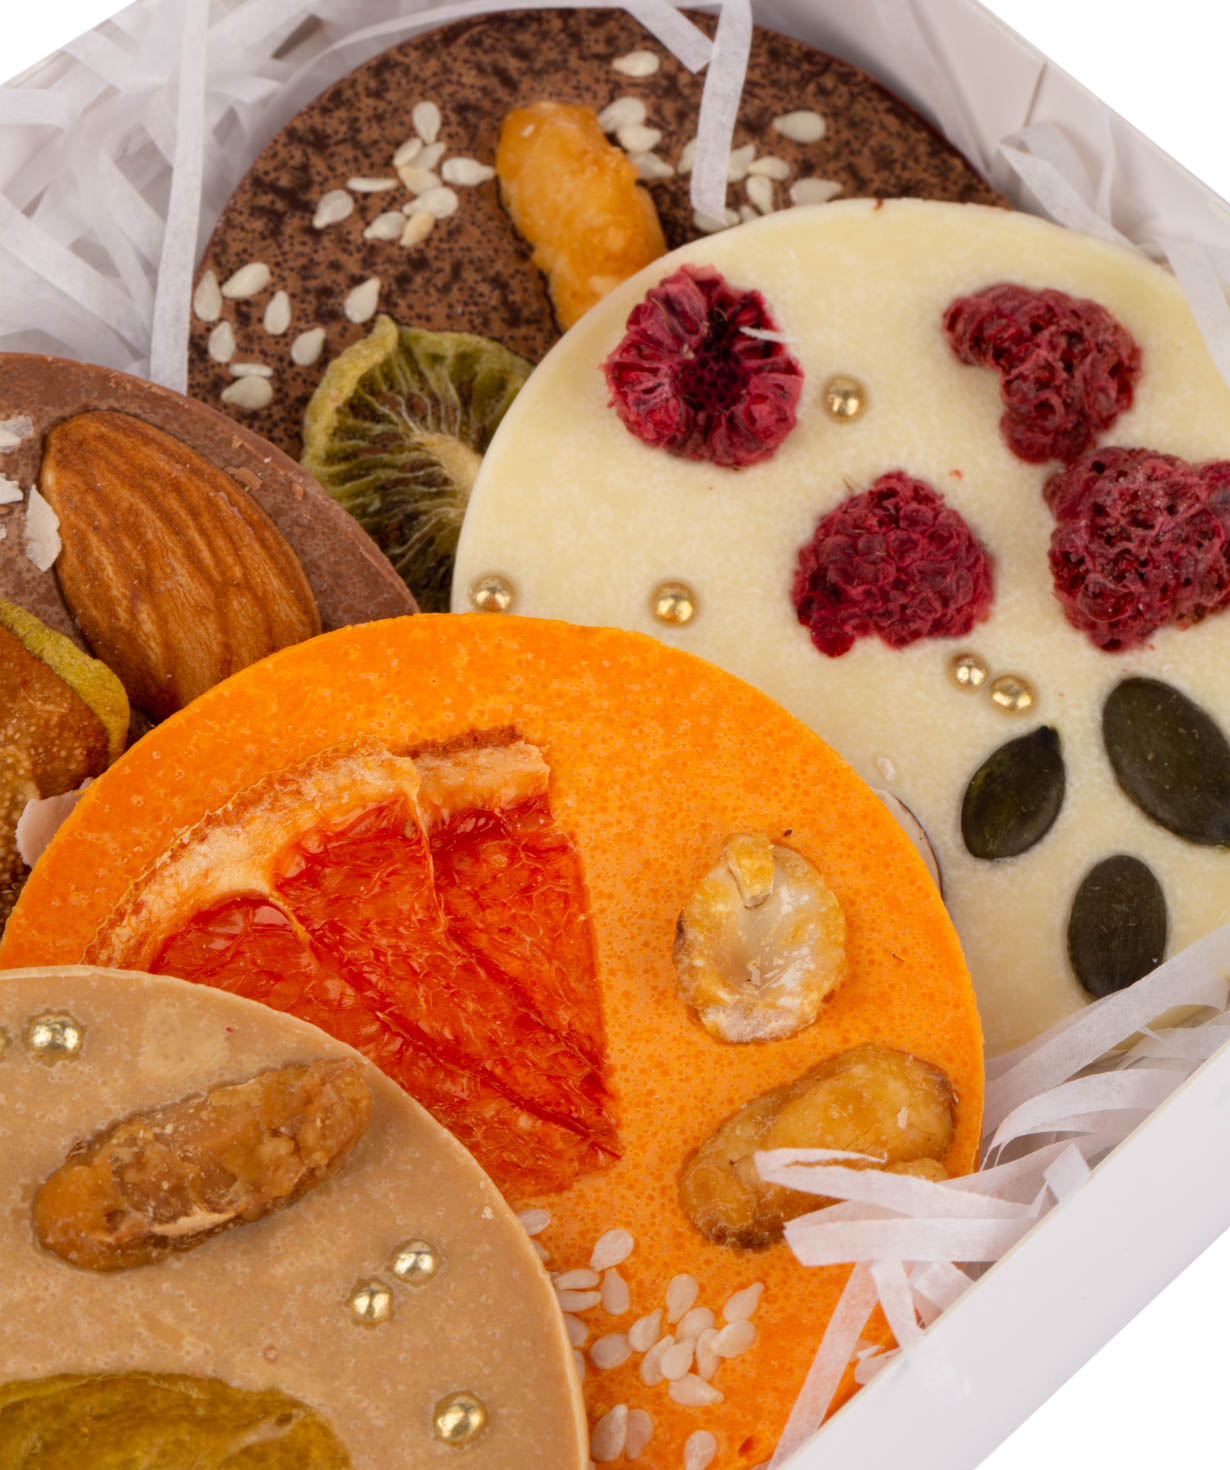 Chocolate `Saryanets` with dried fruit and nuts, in a box №2